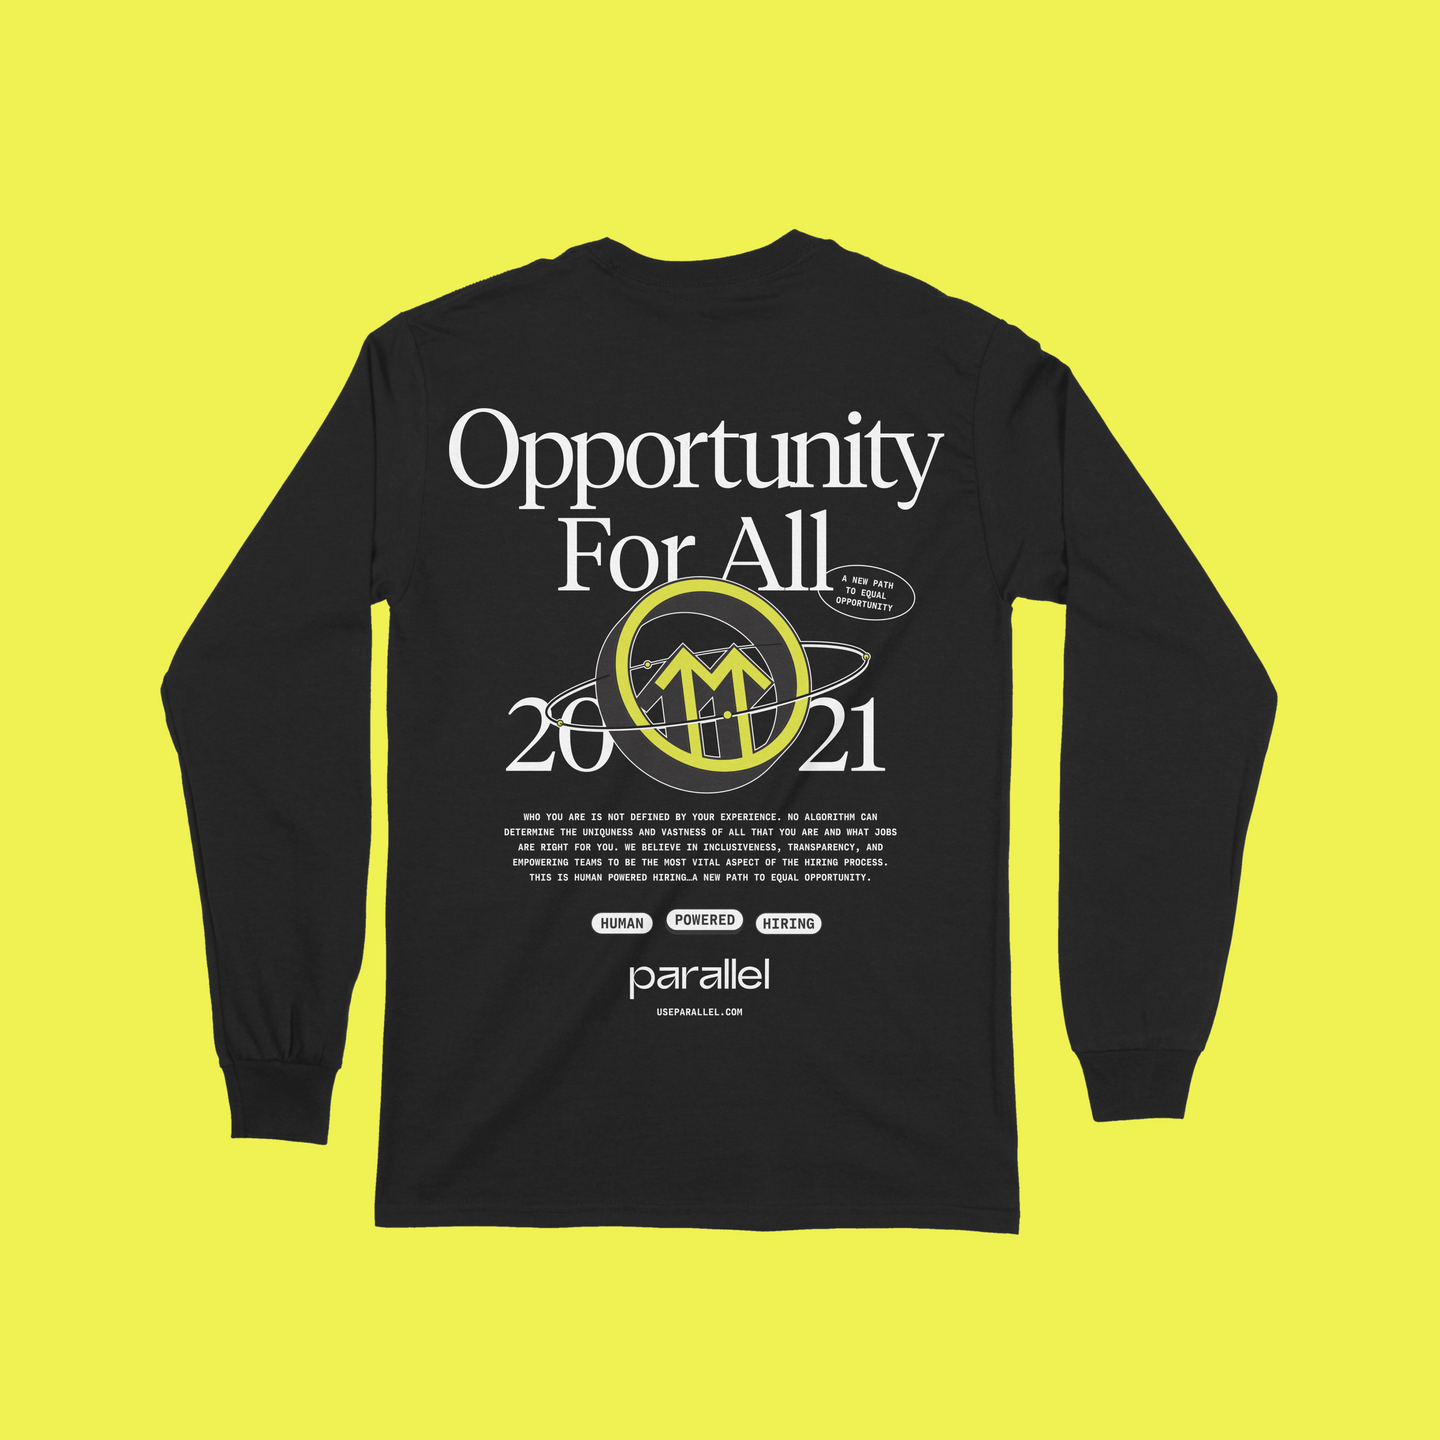 Opportunity For All - Black